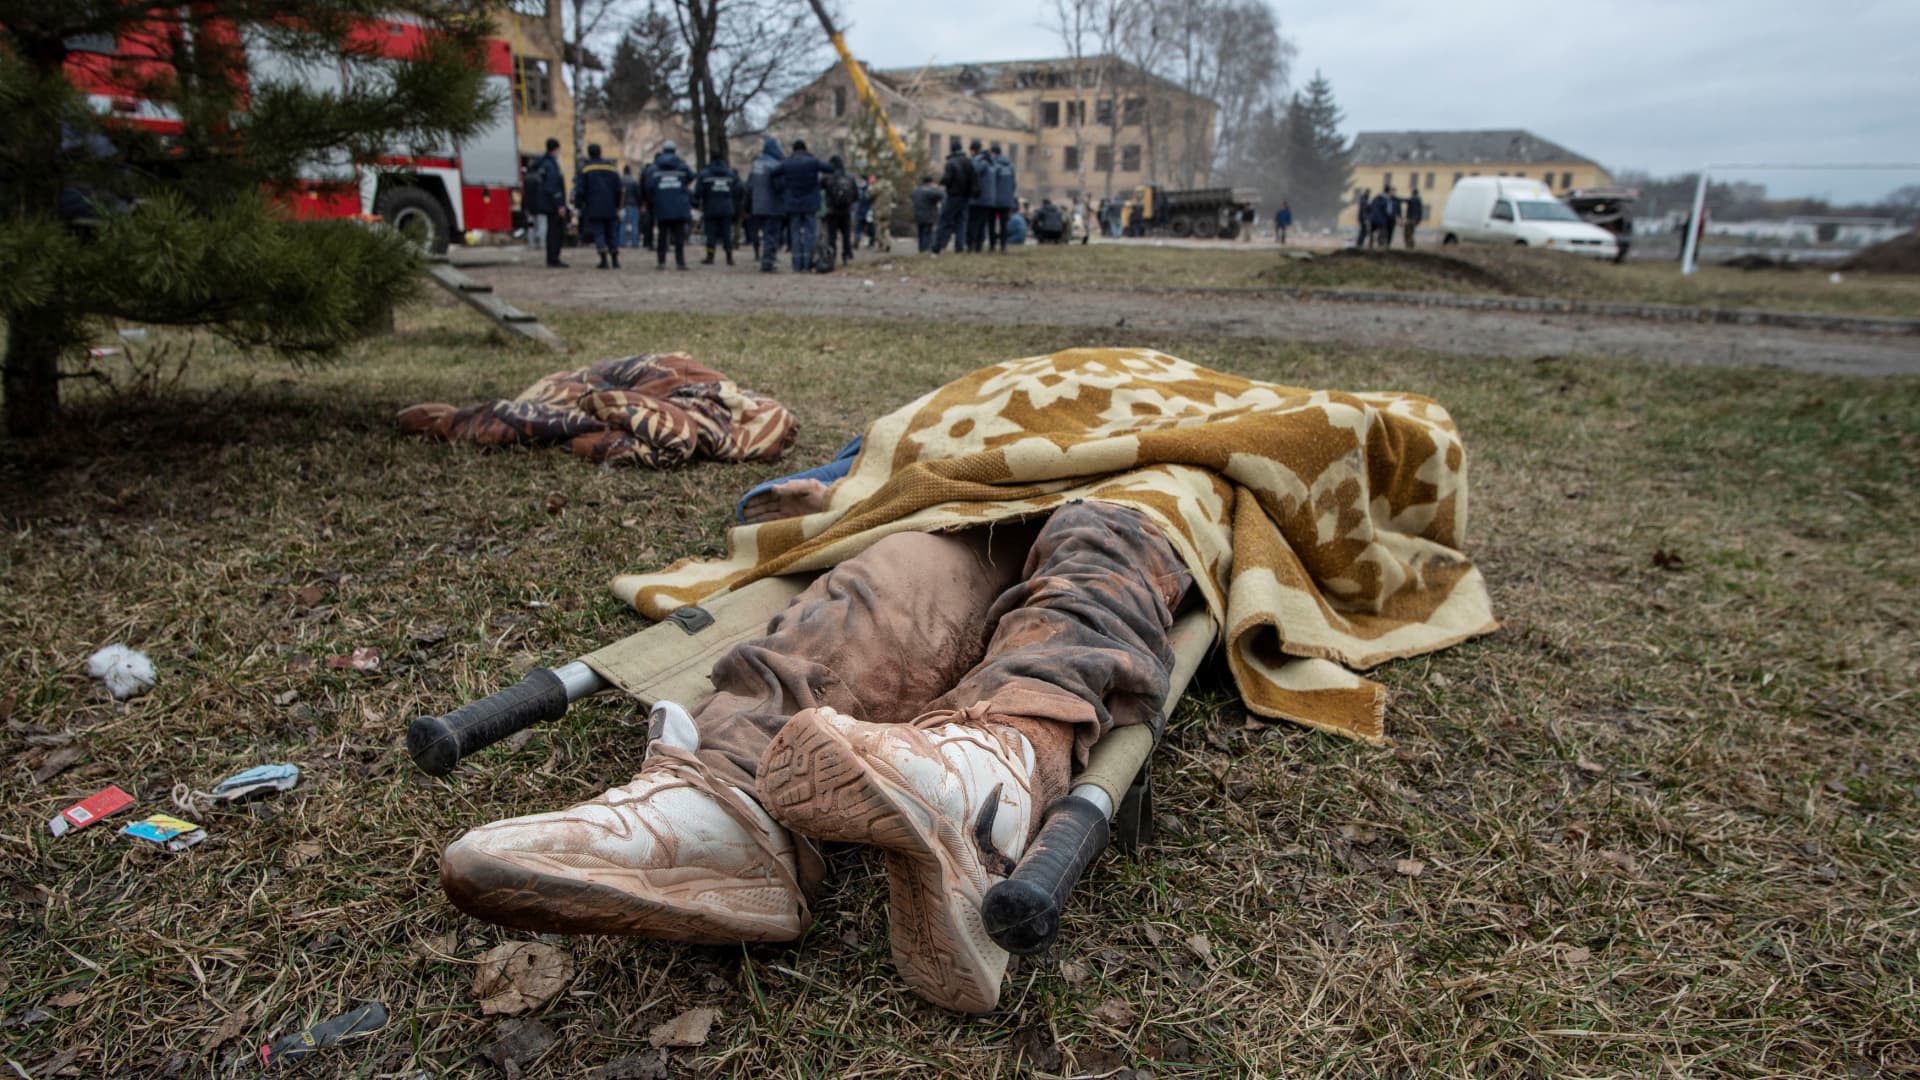 SENSITIVE MATERIAL. THIS IMAGE MAY OFFEND OR DISTURB The body of a person lies on the ground next to a military base building that, according to the Ukrainian ground forces, was destroyed by an air strike, in the town of Okhtyrka in the Sumy region, Ukraine February 28, 2022.